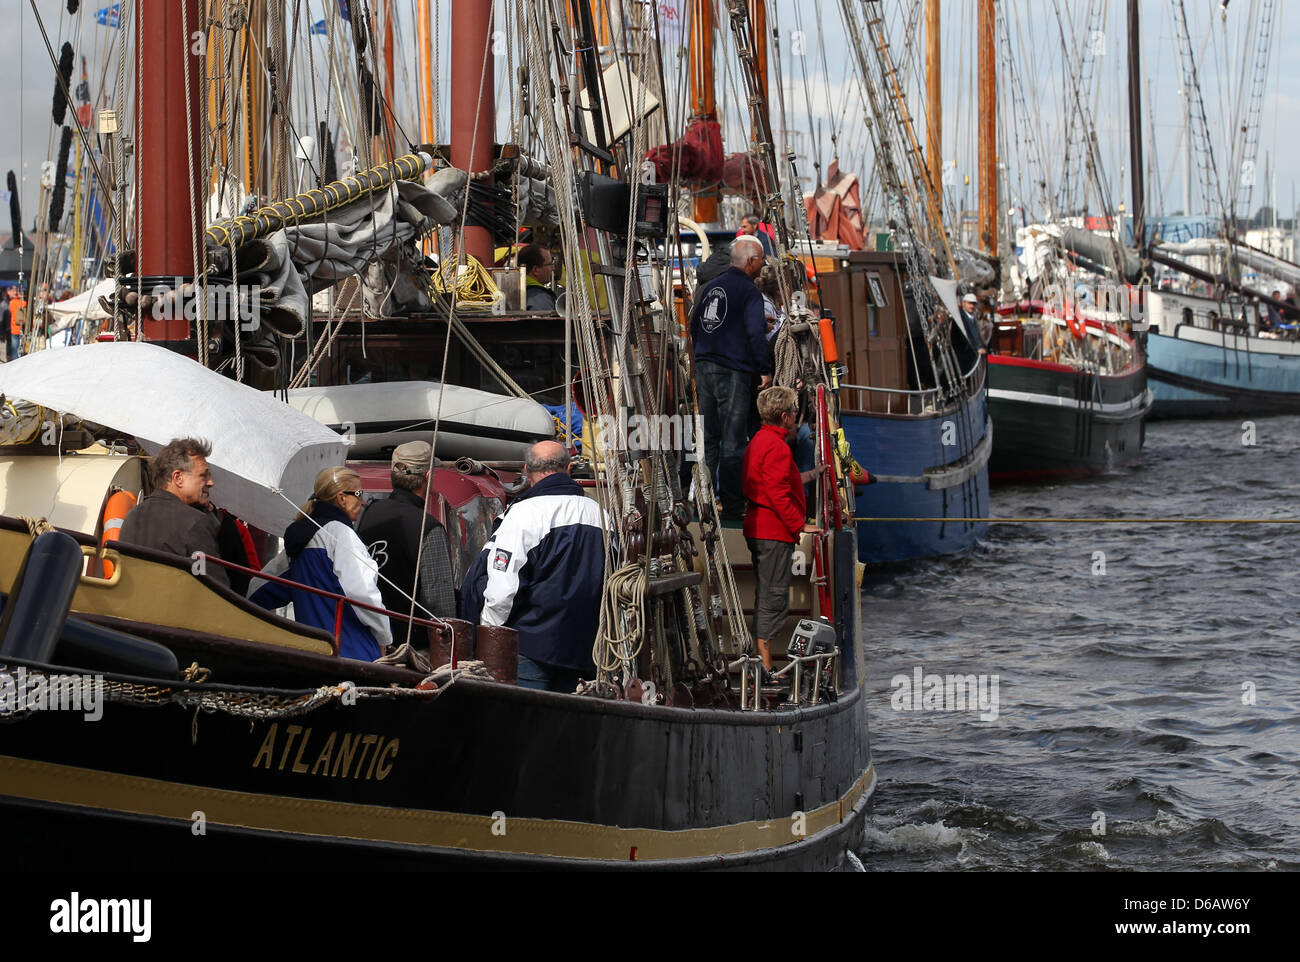 At the city harbor, the first ships go for a trip at the 22nd Hanse Sail festival in Rostock, Germany, 09 August 2012. The maritime festival runs from 09 until 12 August 2012 and features 170 traditional and museum ships. Photo: BERND WUESTNECK Stock Photo